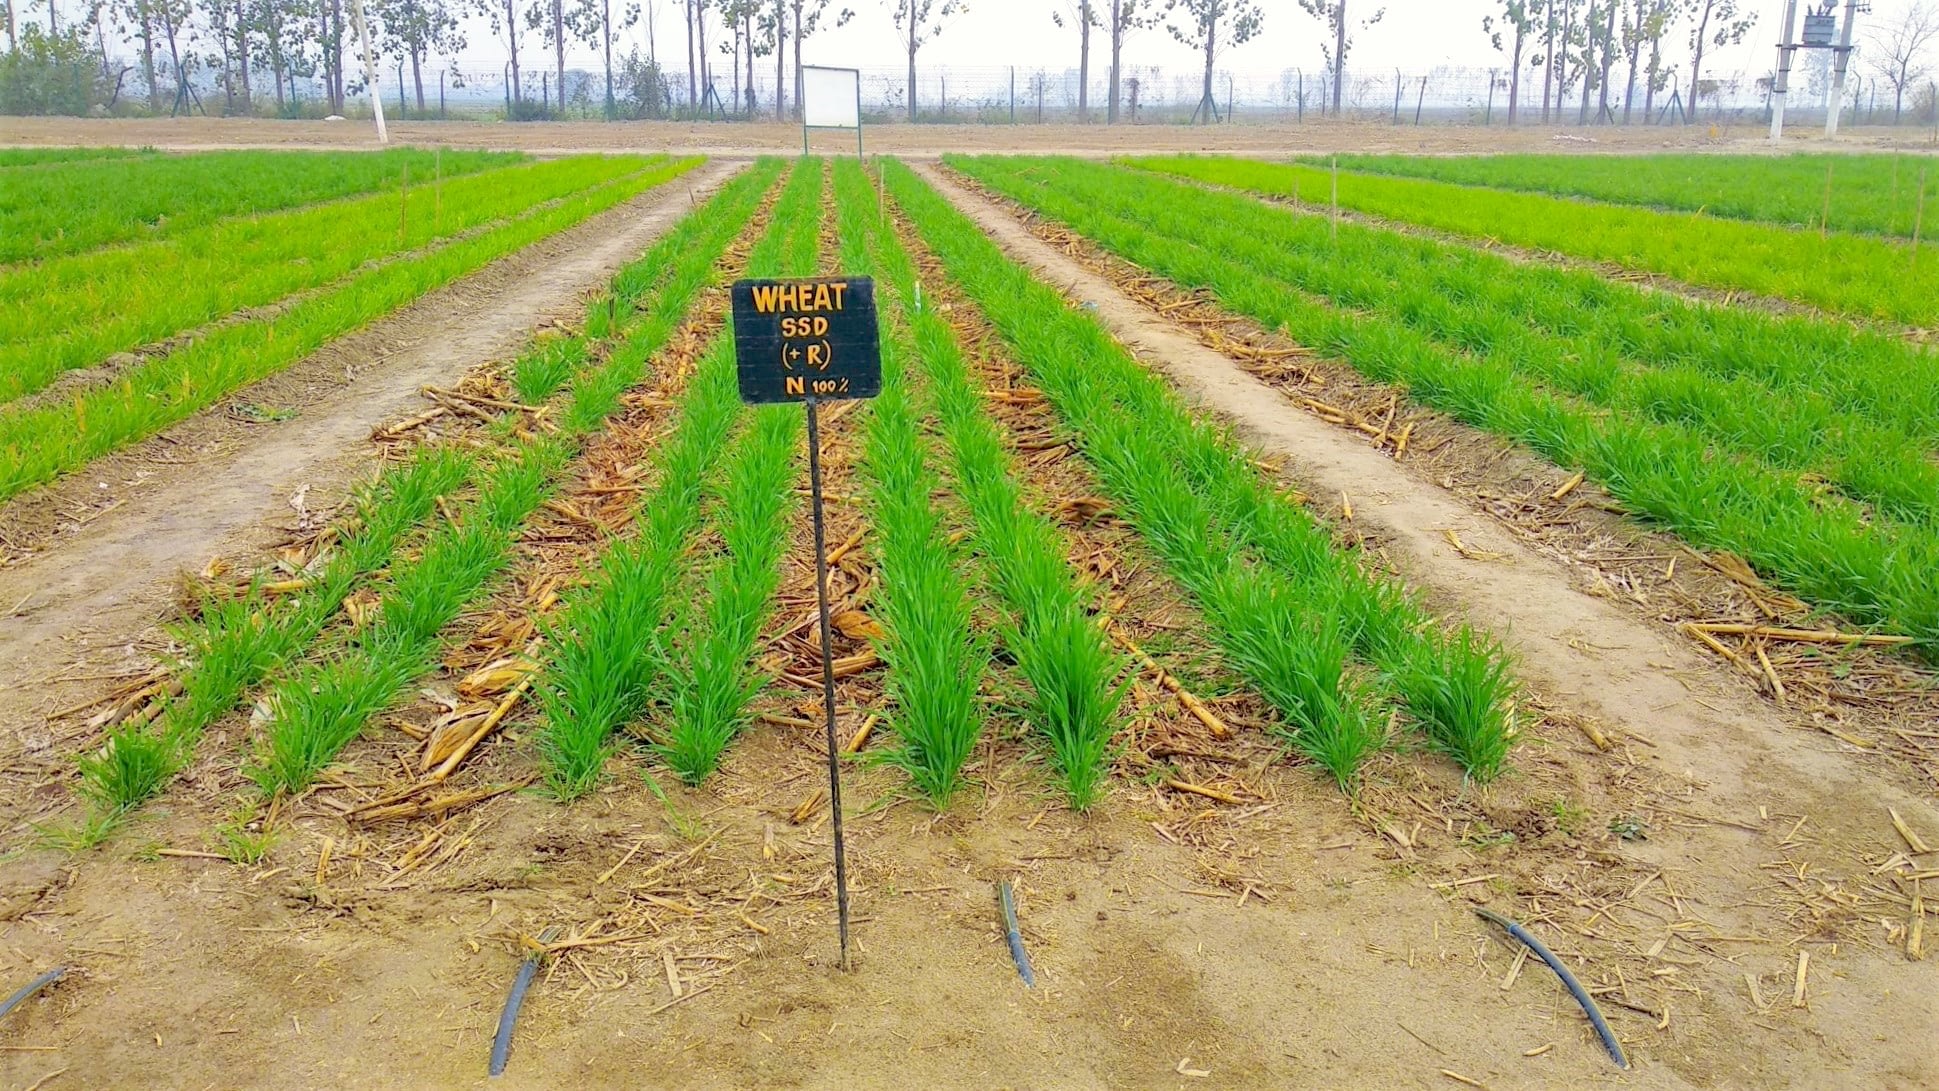 During the study, researchers used a sub-surface drip fertigation system, combined with conservation agriculture approaches, on wheat fields. (Photo: Naveen Gupta/CIMMYT)